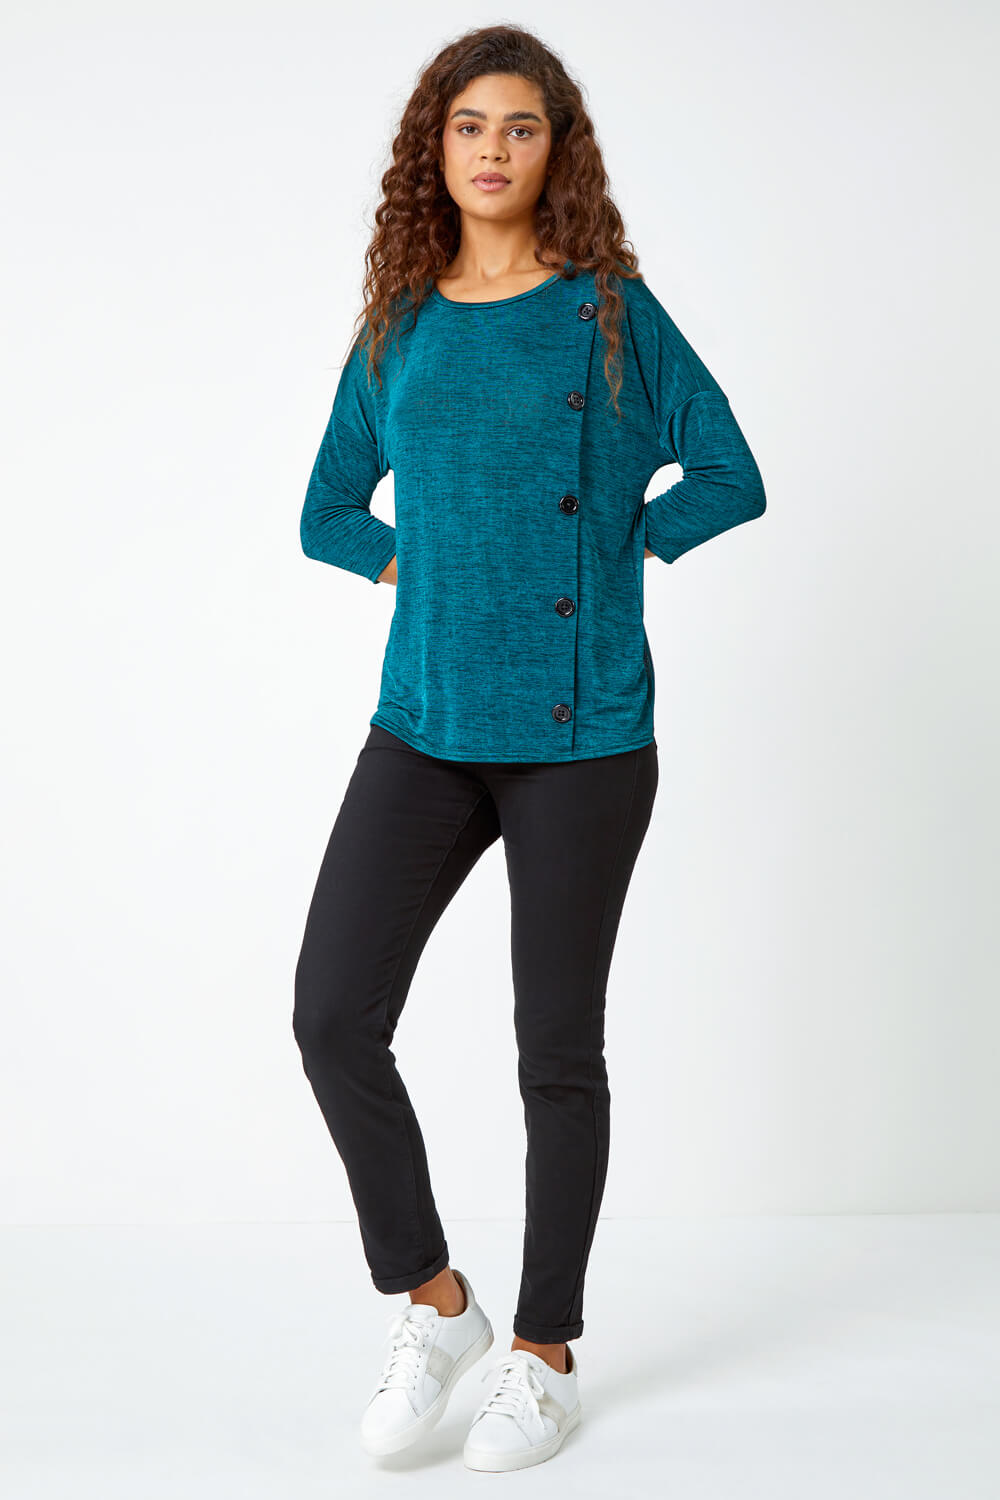 Teal Button Detail Marl Stretch Top, Image 2 of 5